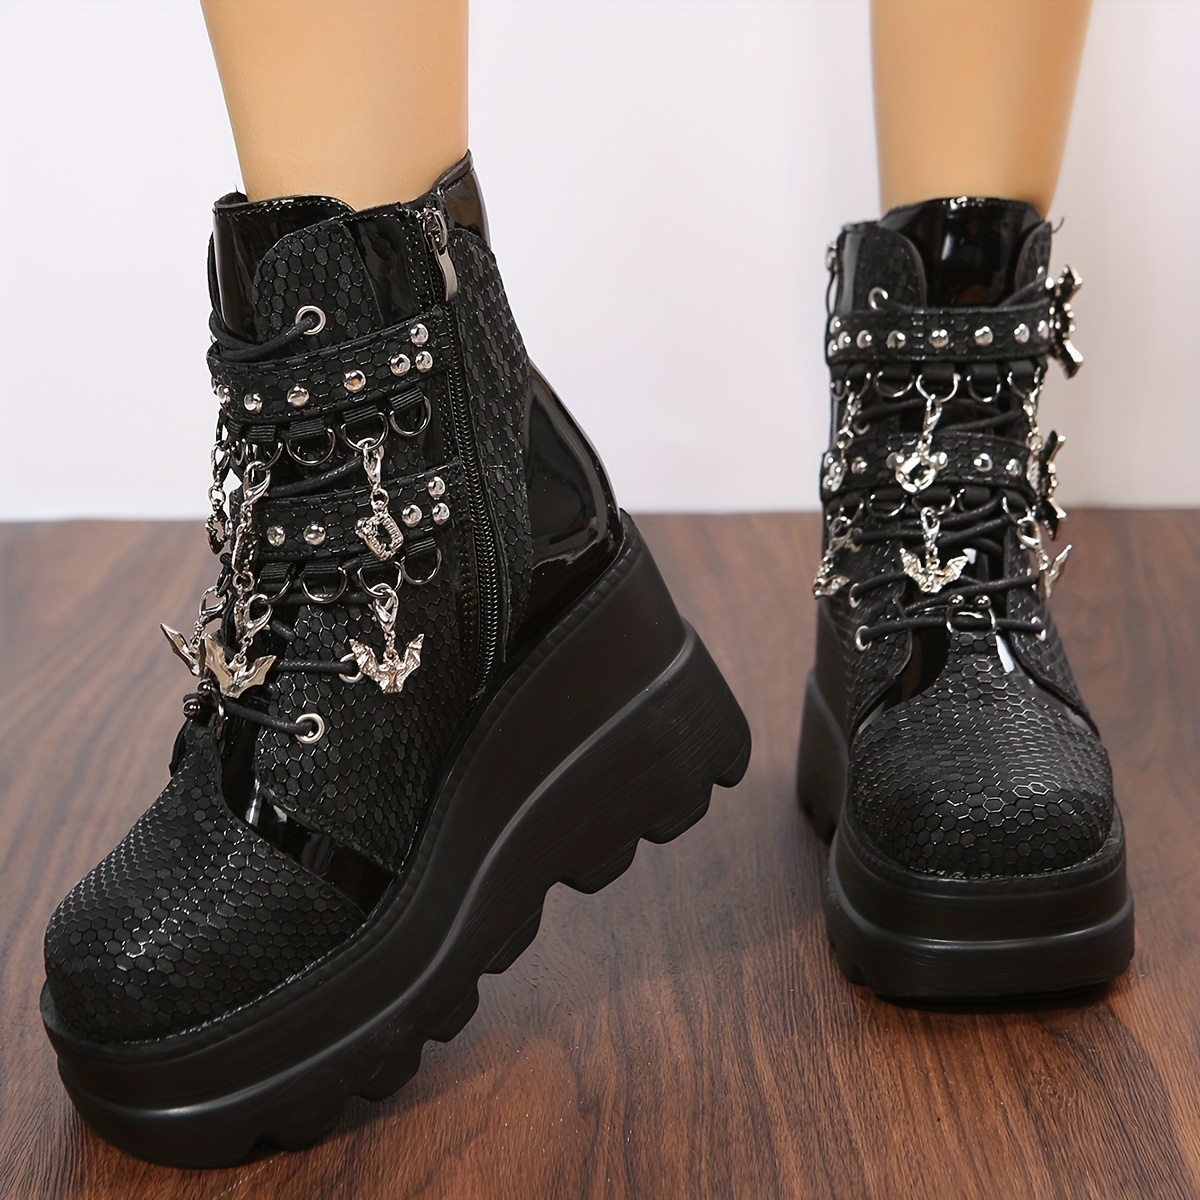 Women's Gothic Platform Ankle Boots, Round Toe Lace Up Buckle